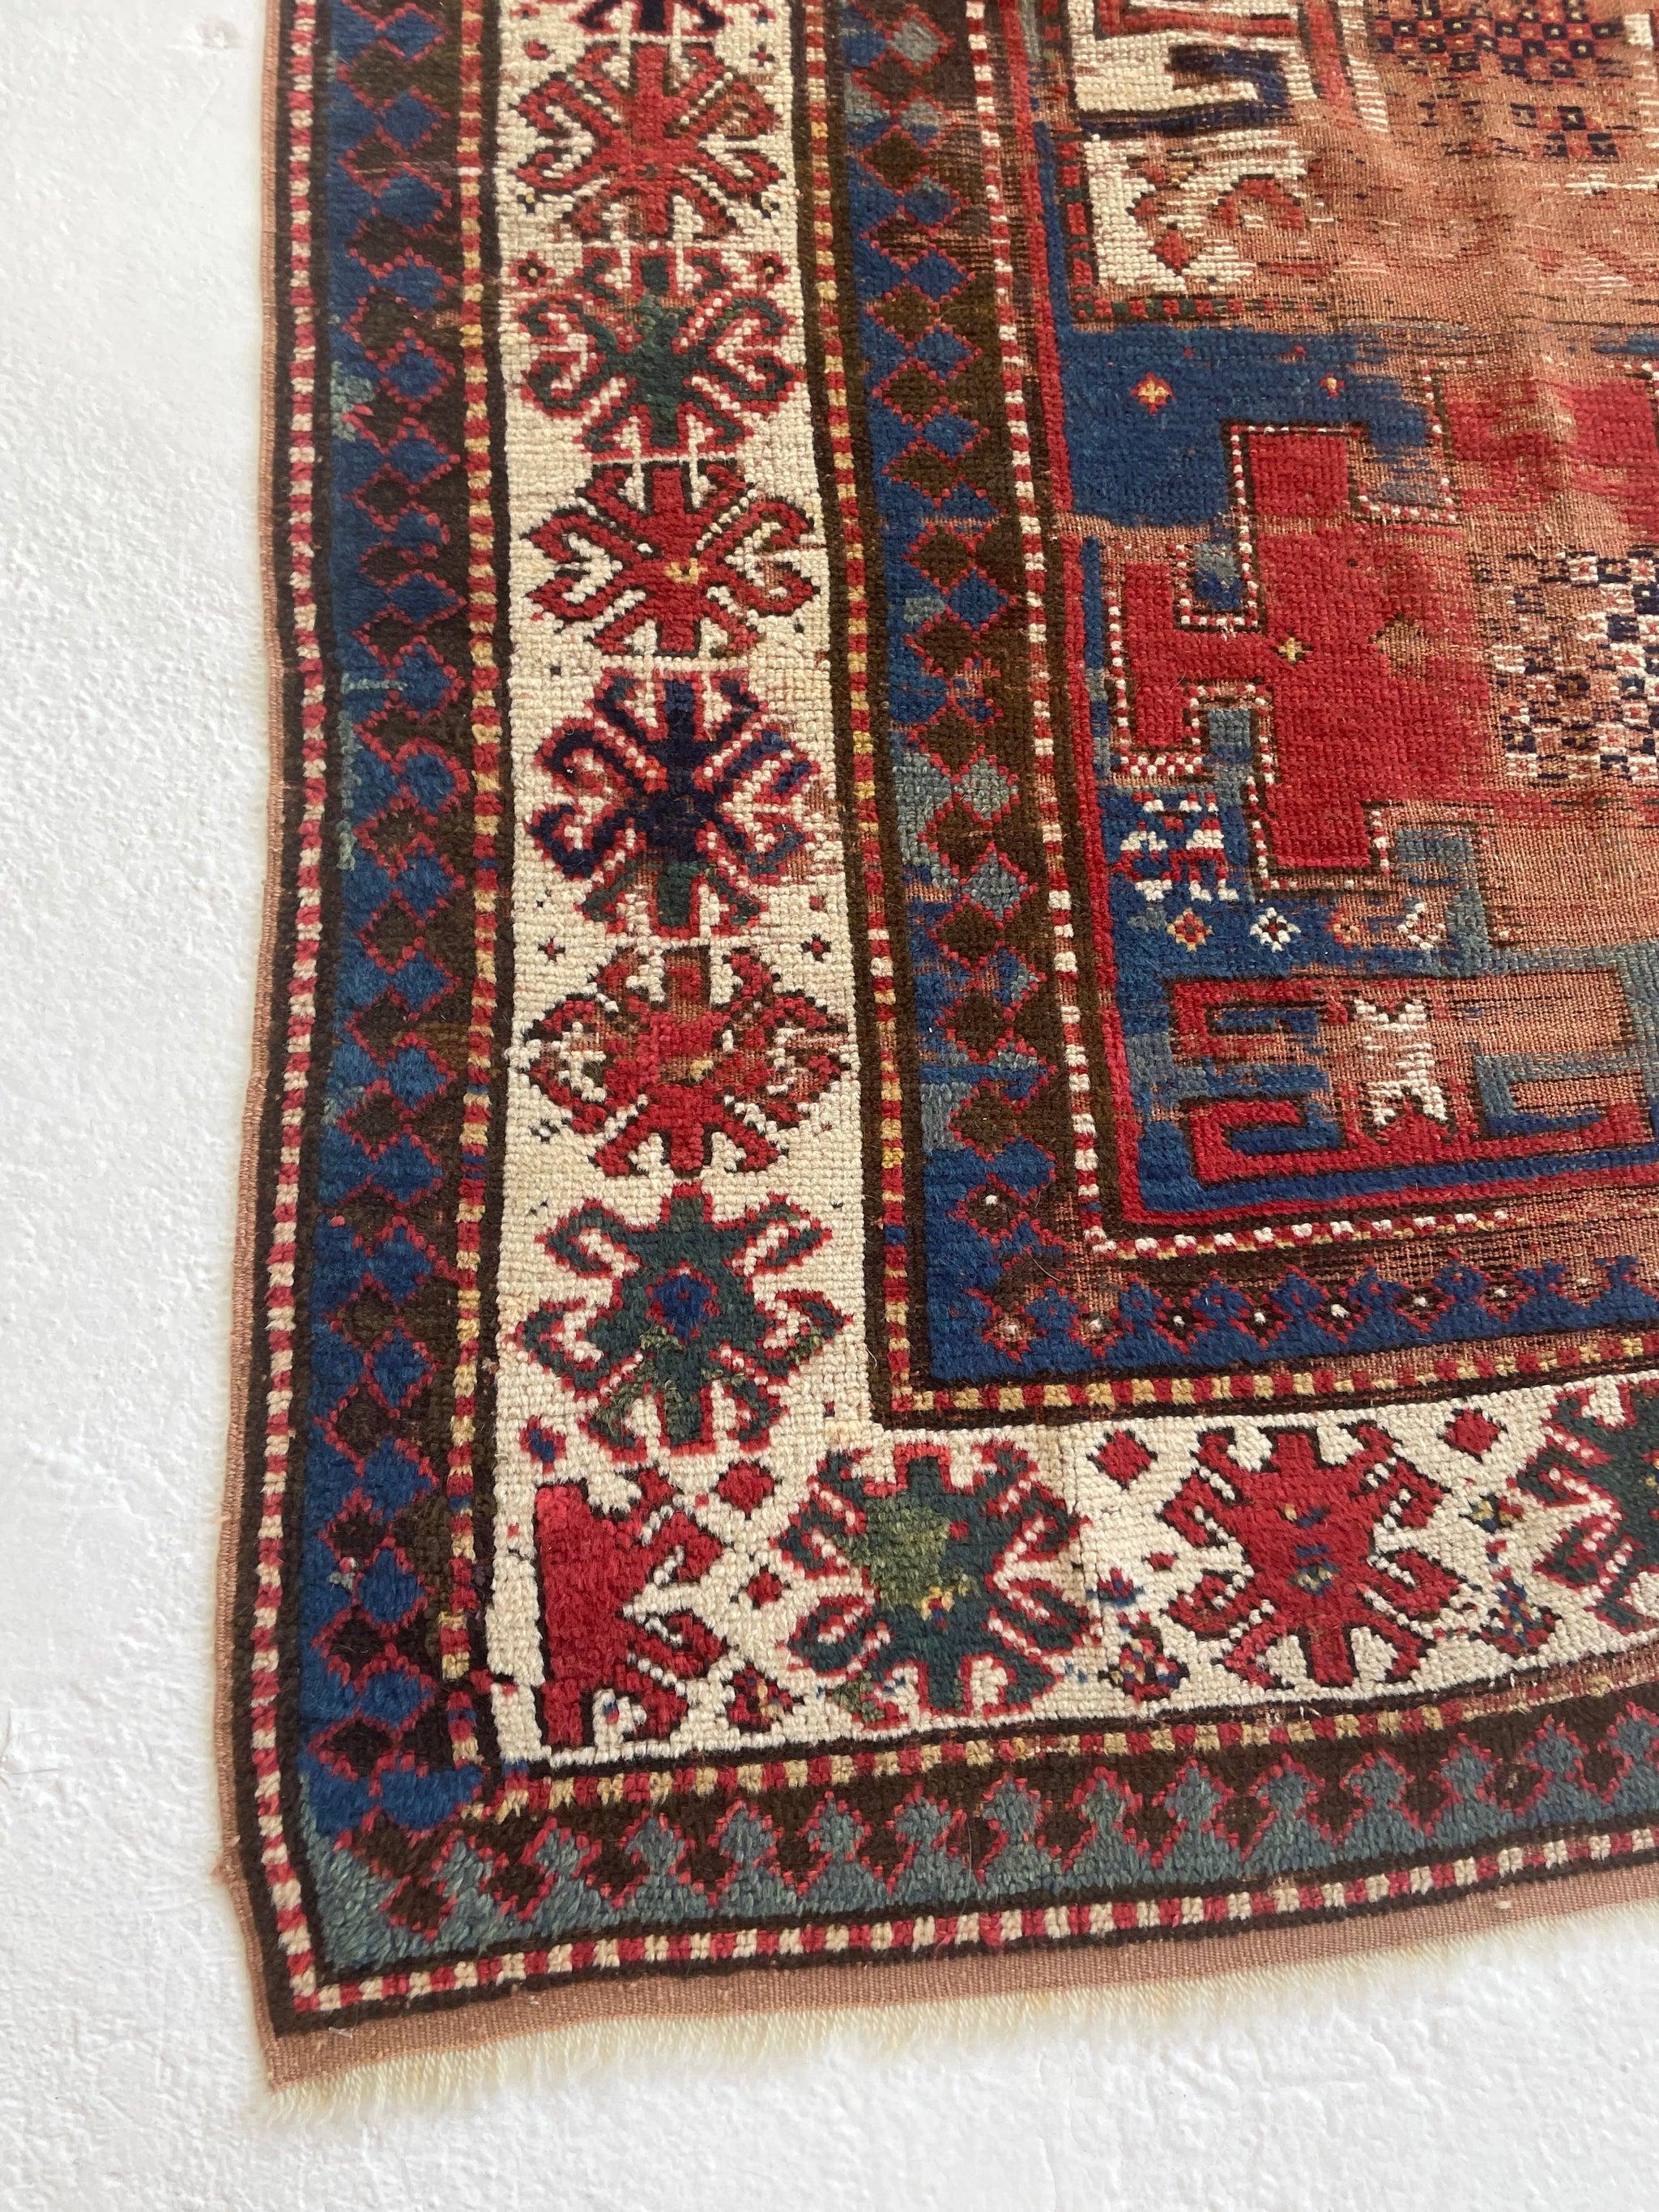 Handsome Antique Kazak Rug  Character-Rich with Iconic Fence of Protection Perimeter 

About: Old-world charm packed in this piece with an iconic fence perimeter and sensational color palette with charcoal, teals, wheat, 20 shades of blue, and more.